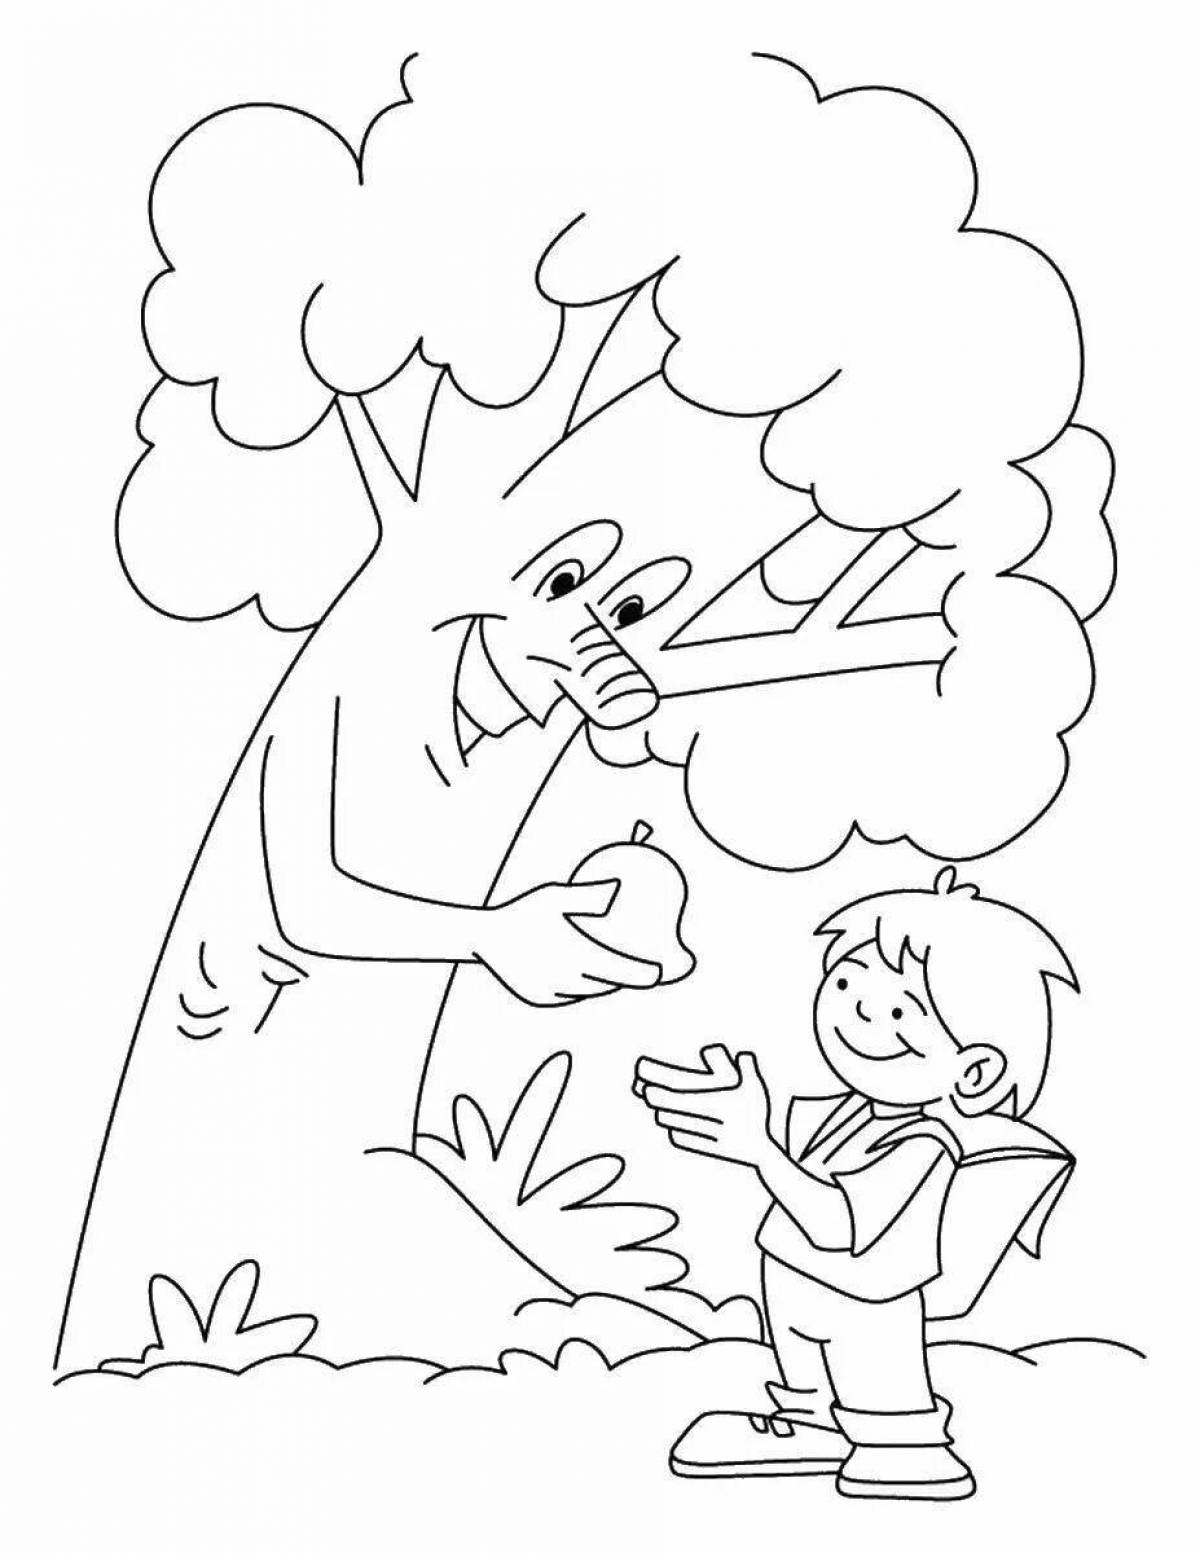 Care for nature bright coloring book for preschoolers